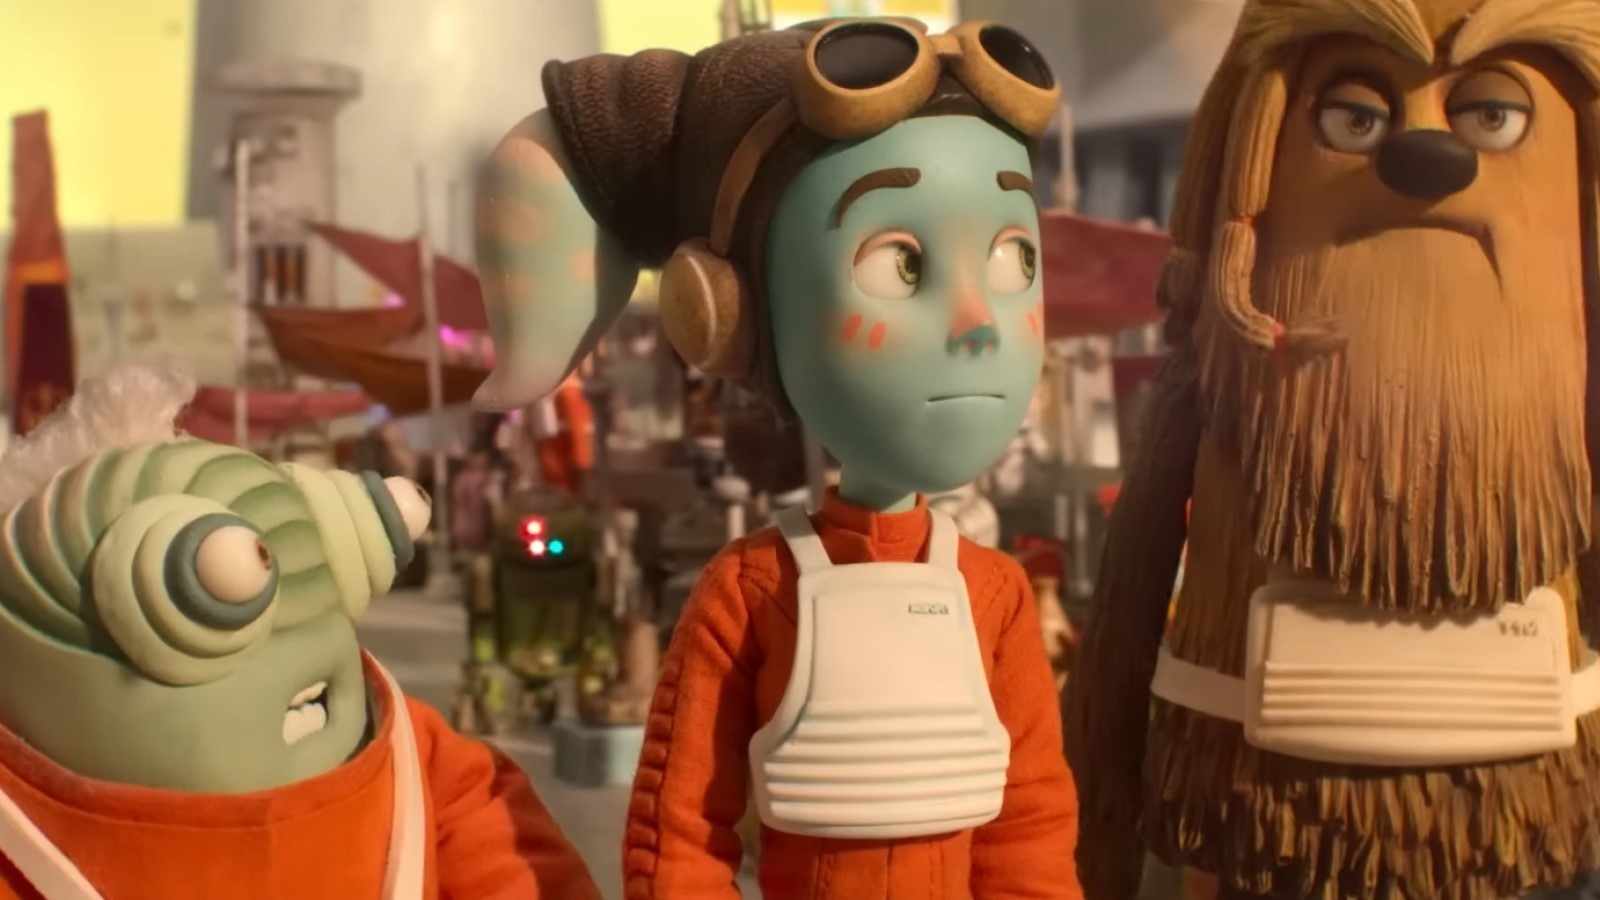 Aardman's Star Wars Visions Short Is Cute, Heartfelt, And Offers A New Angle On A Familiar Universe